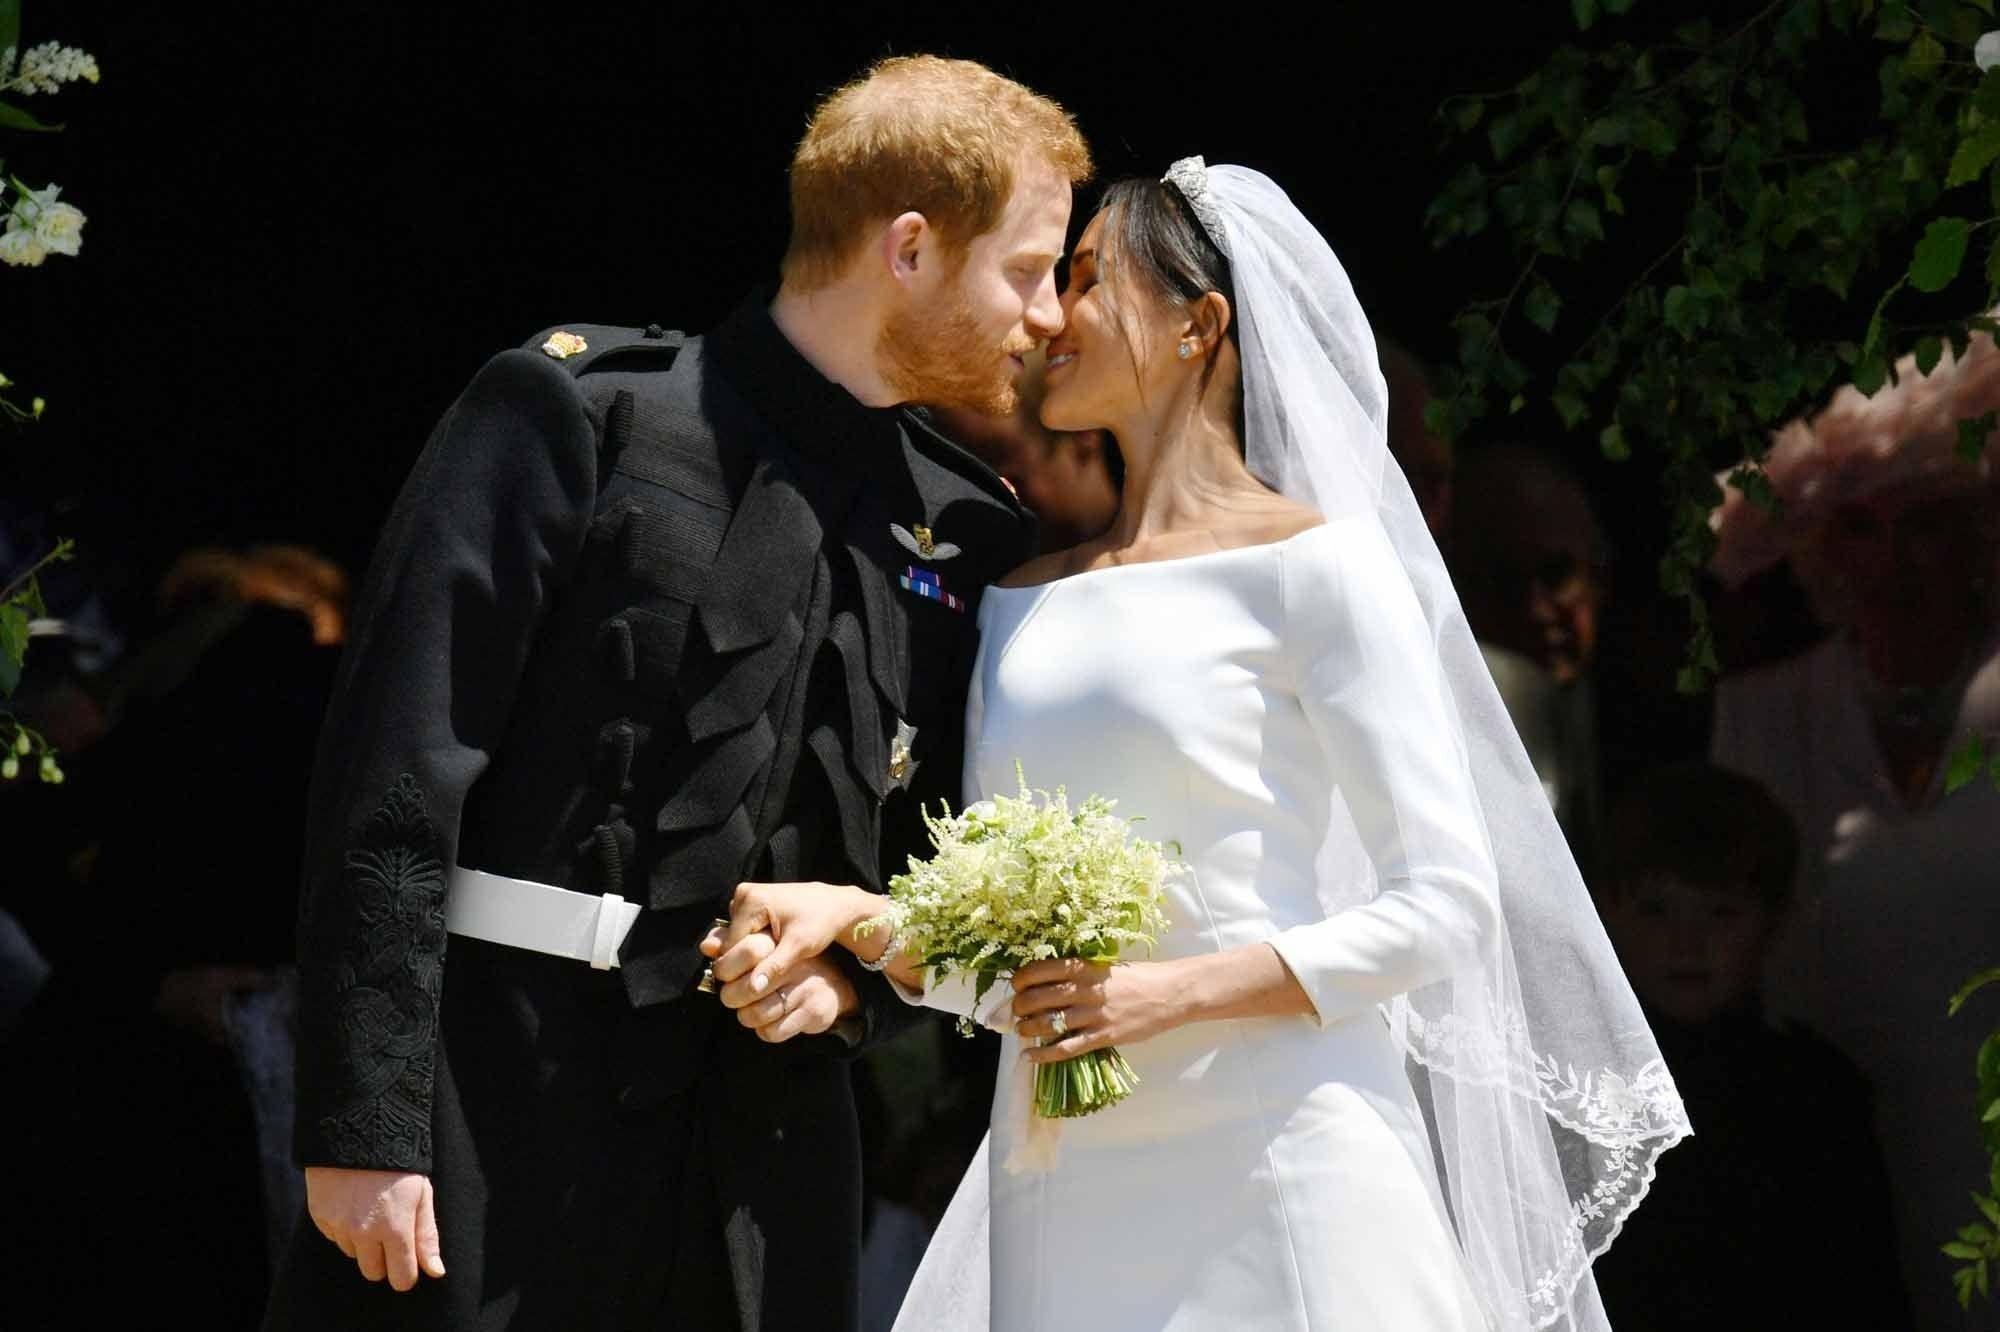 Britain's Prince Harry, Duke of Sussex kisses his wife Meghan, Duchess of Sussex as they leave from the West Door of St George's Chapel, Windsor Castle, in Windsor, on May 19, 2018 after their wedding ceremony. / AFP PHOTO / POOL / Ben Birchall